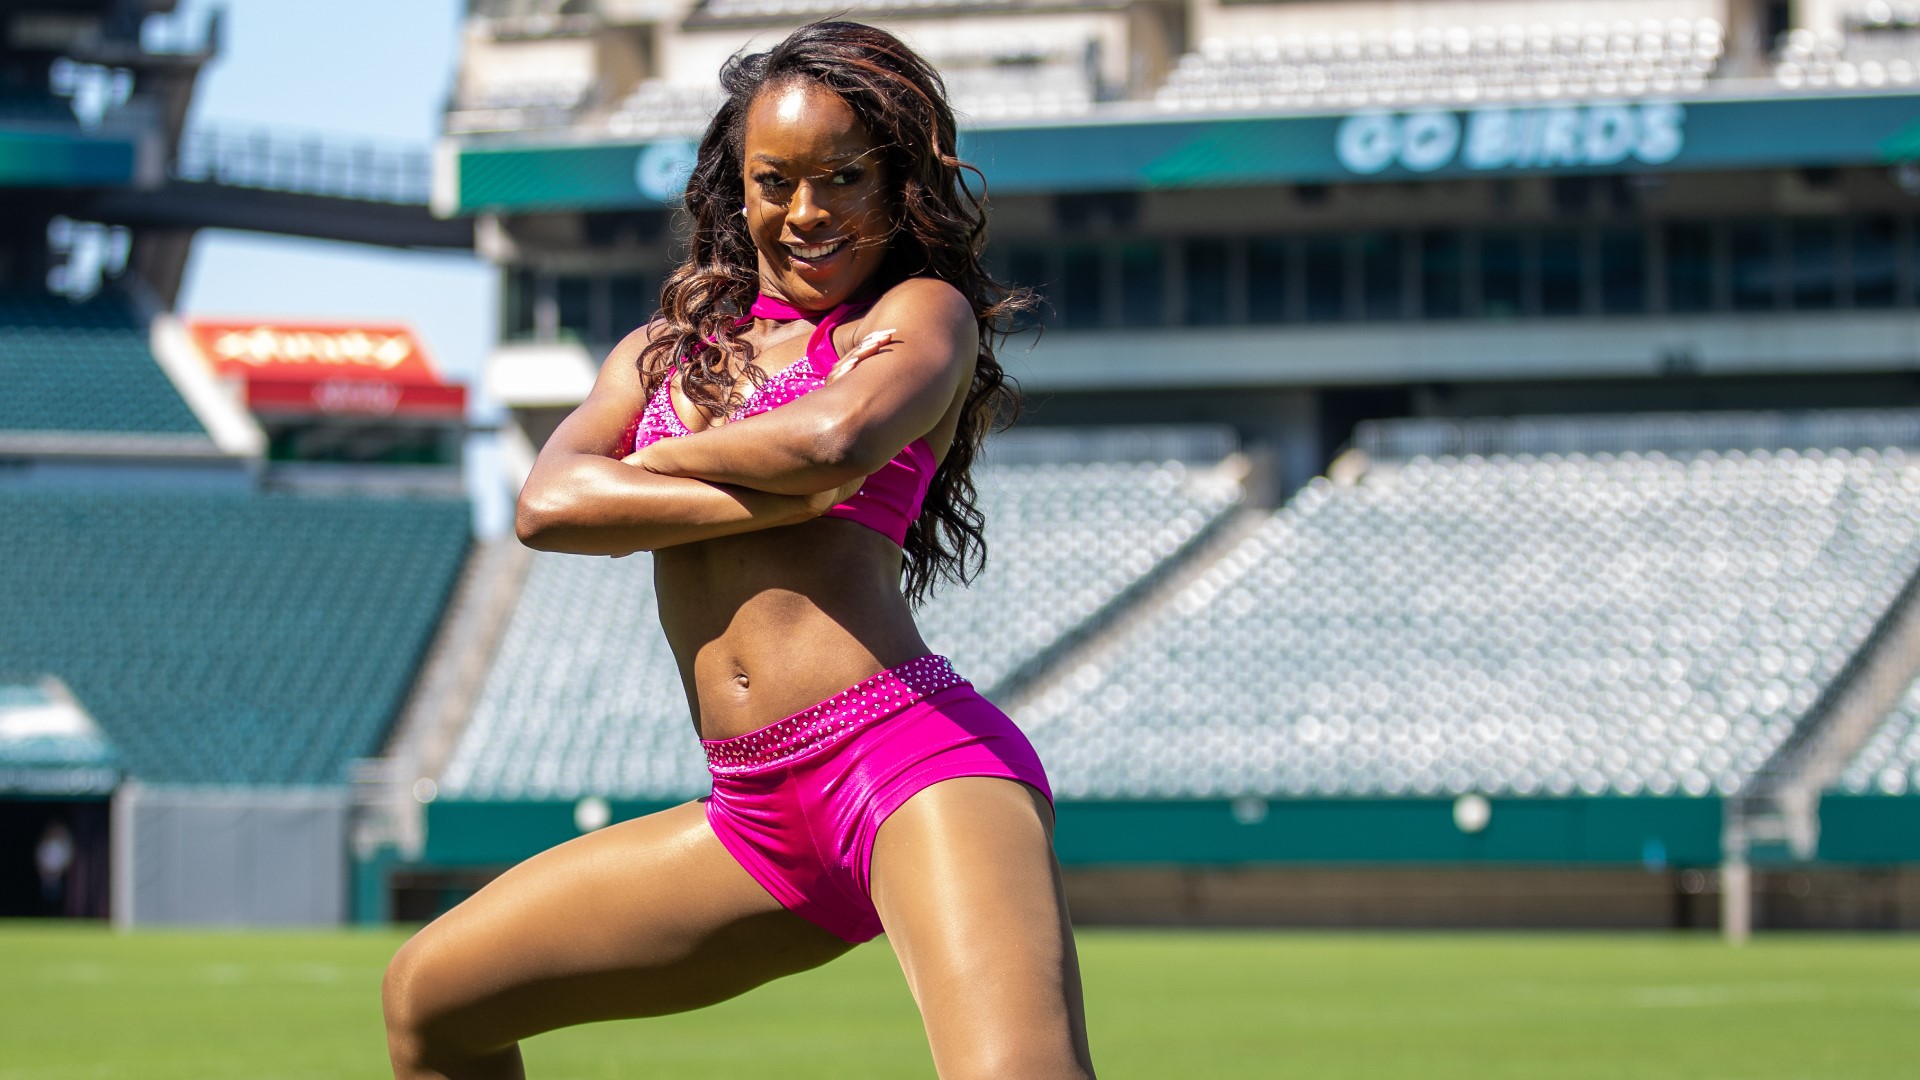 Angel Golphin (Ship '15) is 1 of 11 new members to join the Philadelphia Eagles cheerleading squad in 2021 among the hundreds of candidates that tried out.